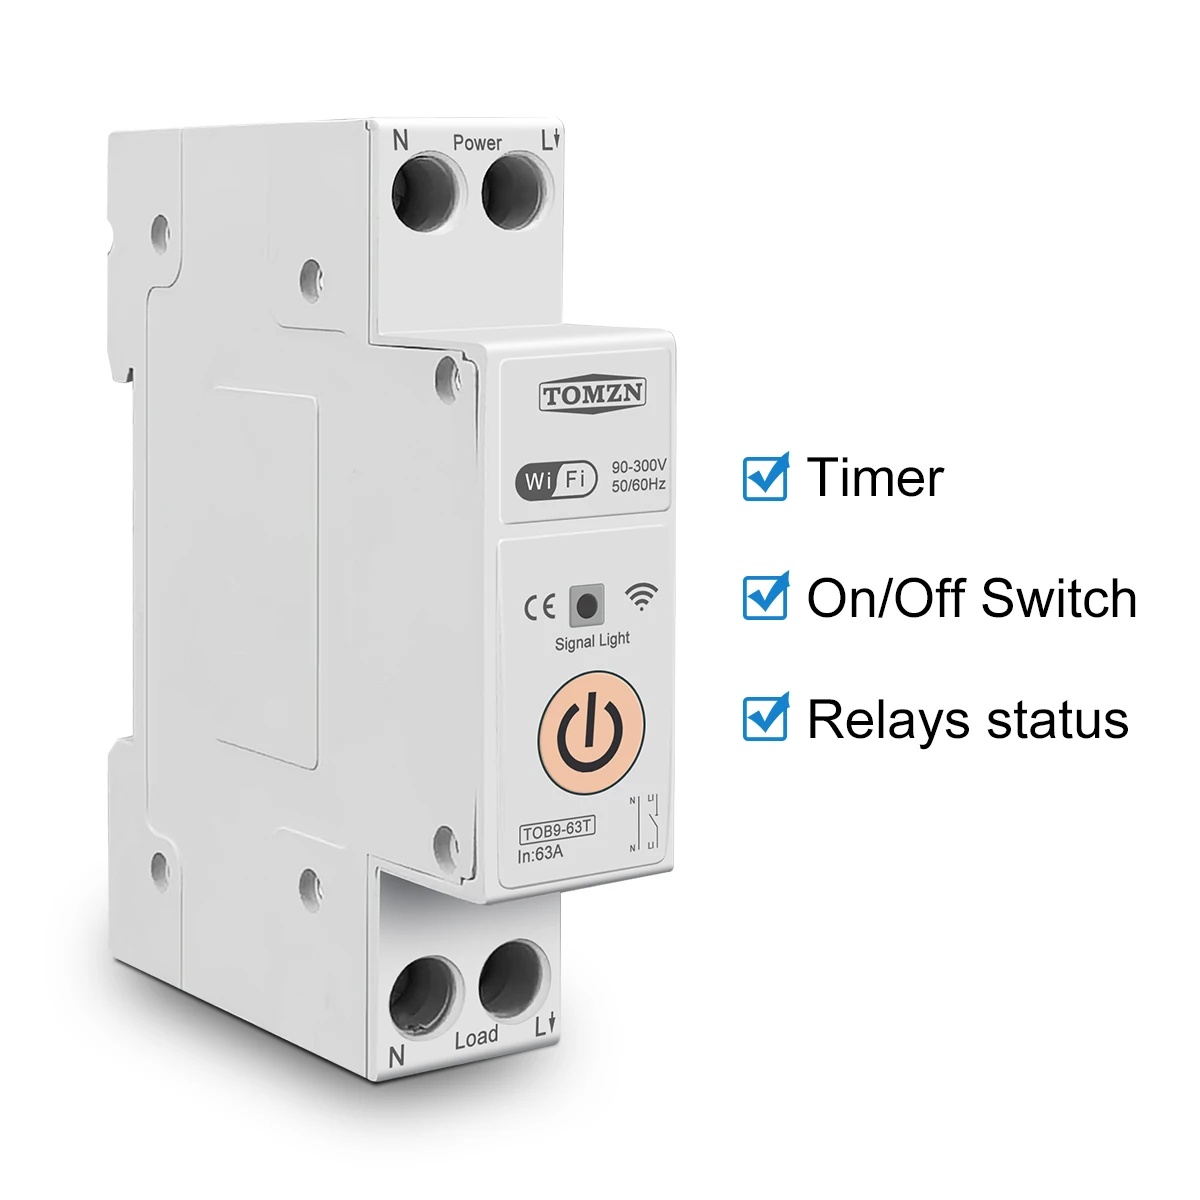 TOMZN 63A 1P+N WIFI Smart Switch Energy Meter Kwh Metering Monitoring Timer Relay MCB TUYA smartlife voltage current protection